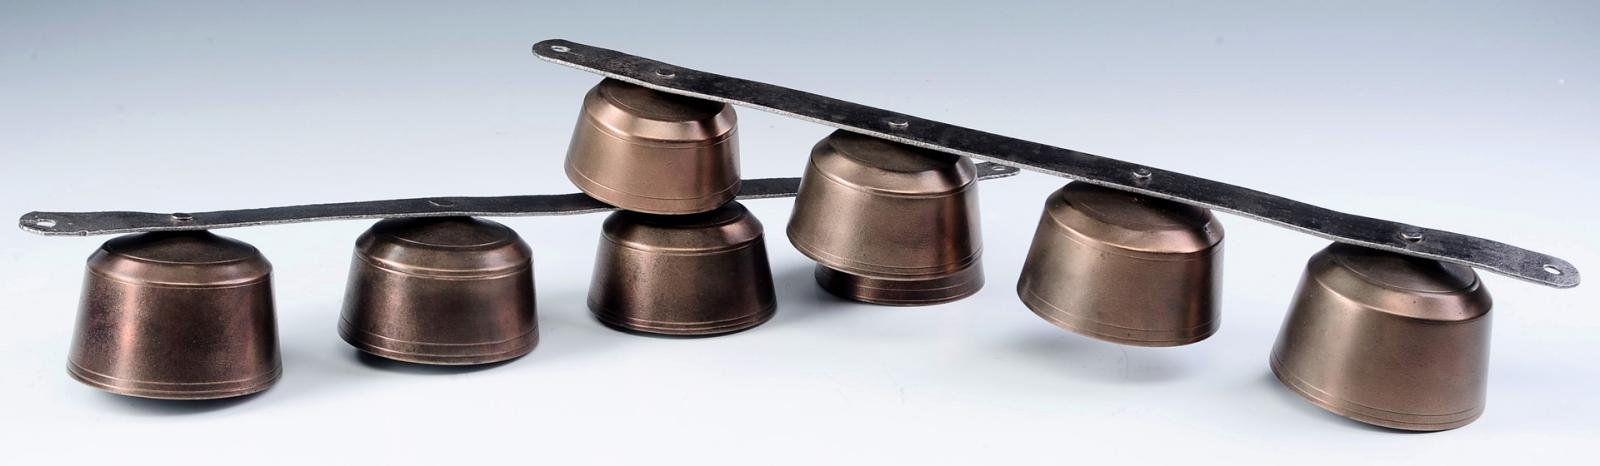 TWO SETS OF MATCHING BRASS SHAFT BELLS MOUNTED ON IRON